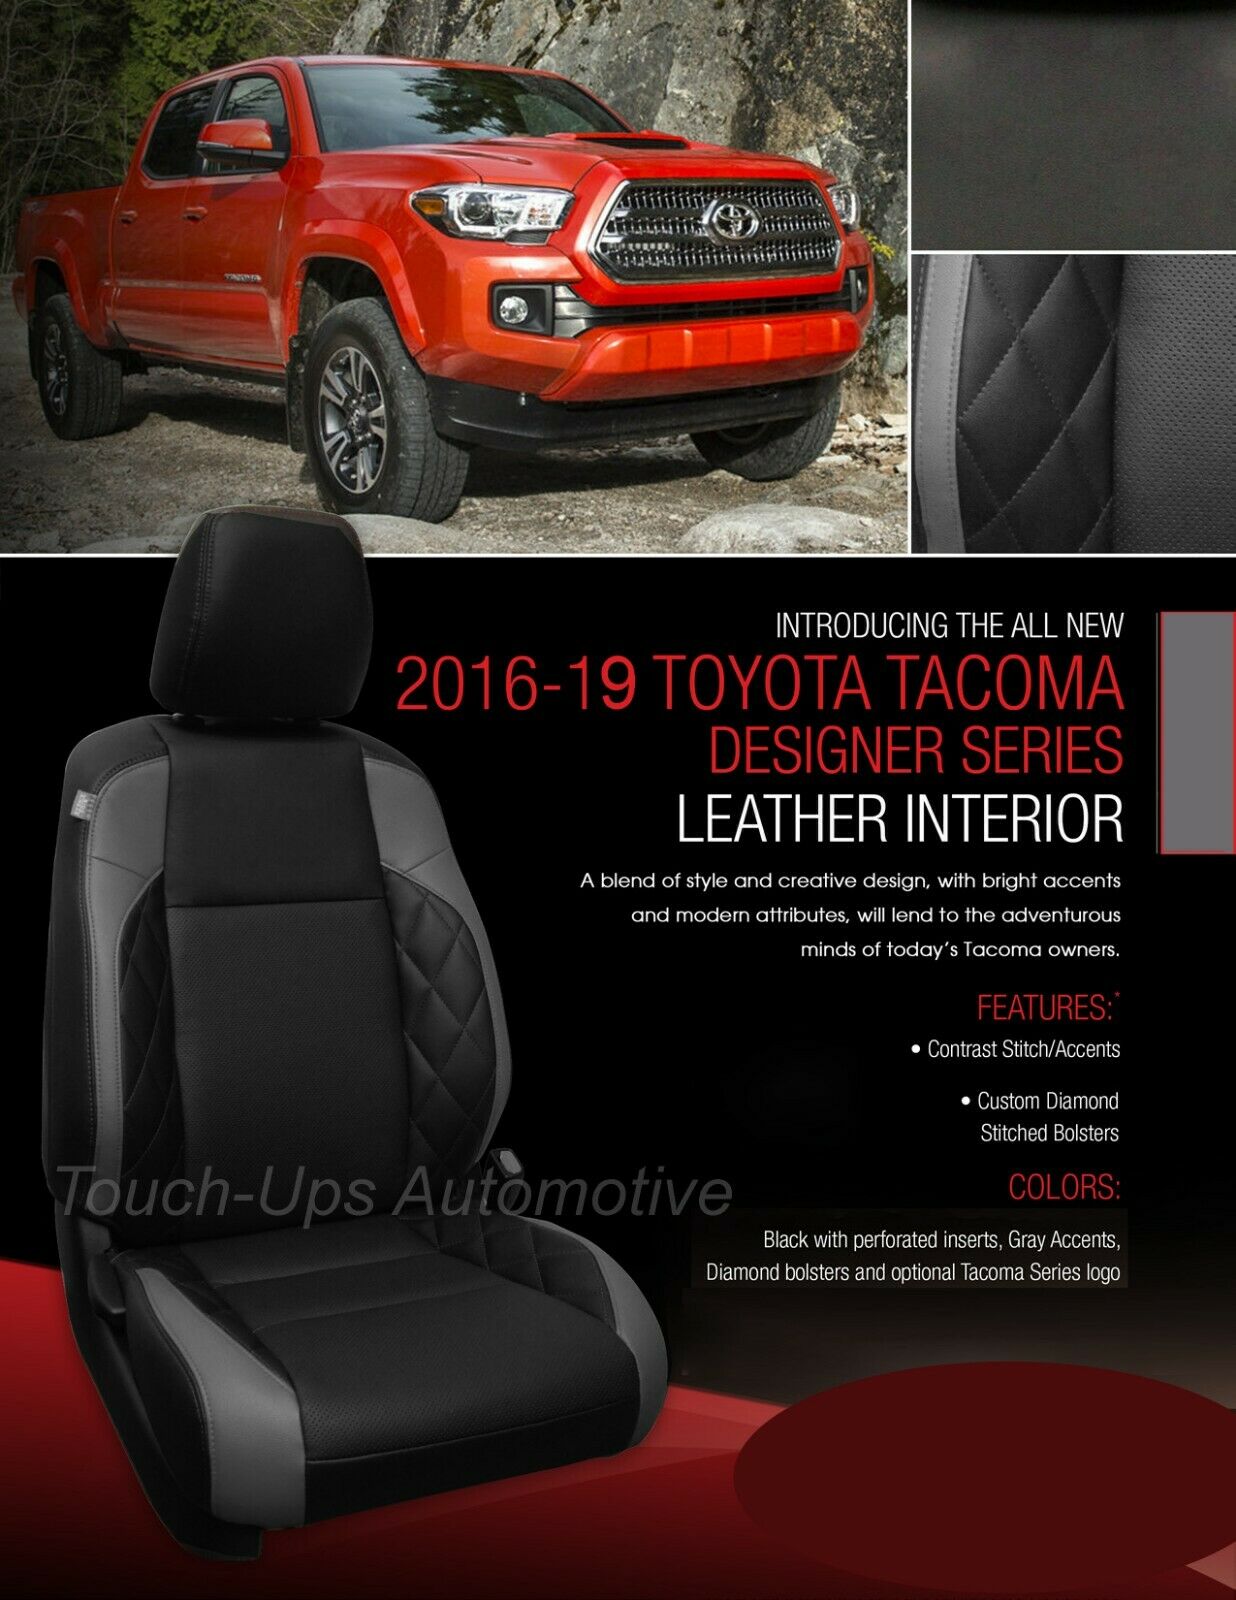 Toyota Tacoma ver 2 Car Seat Covers - USALast